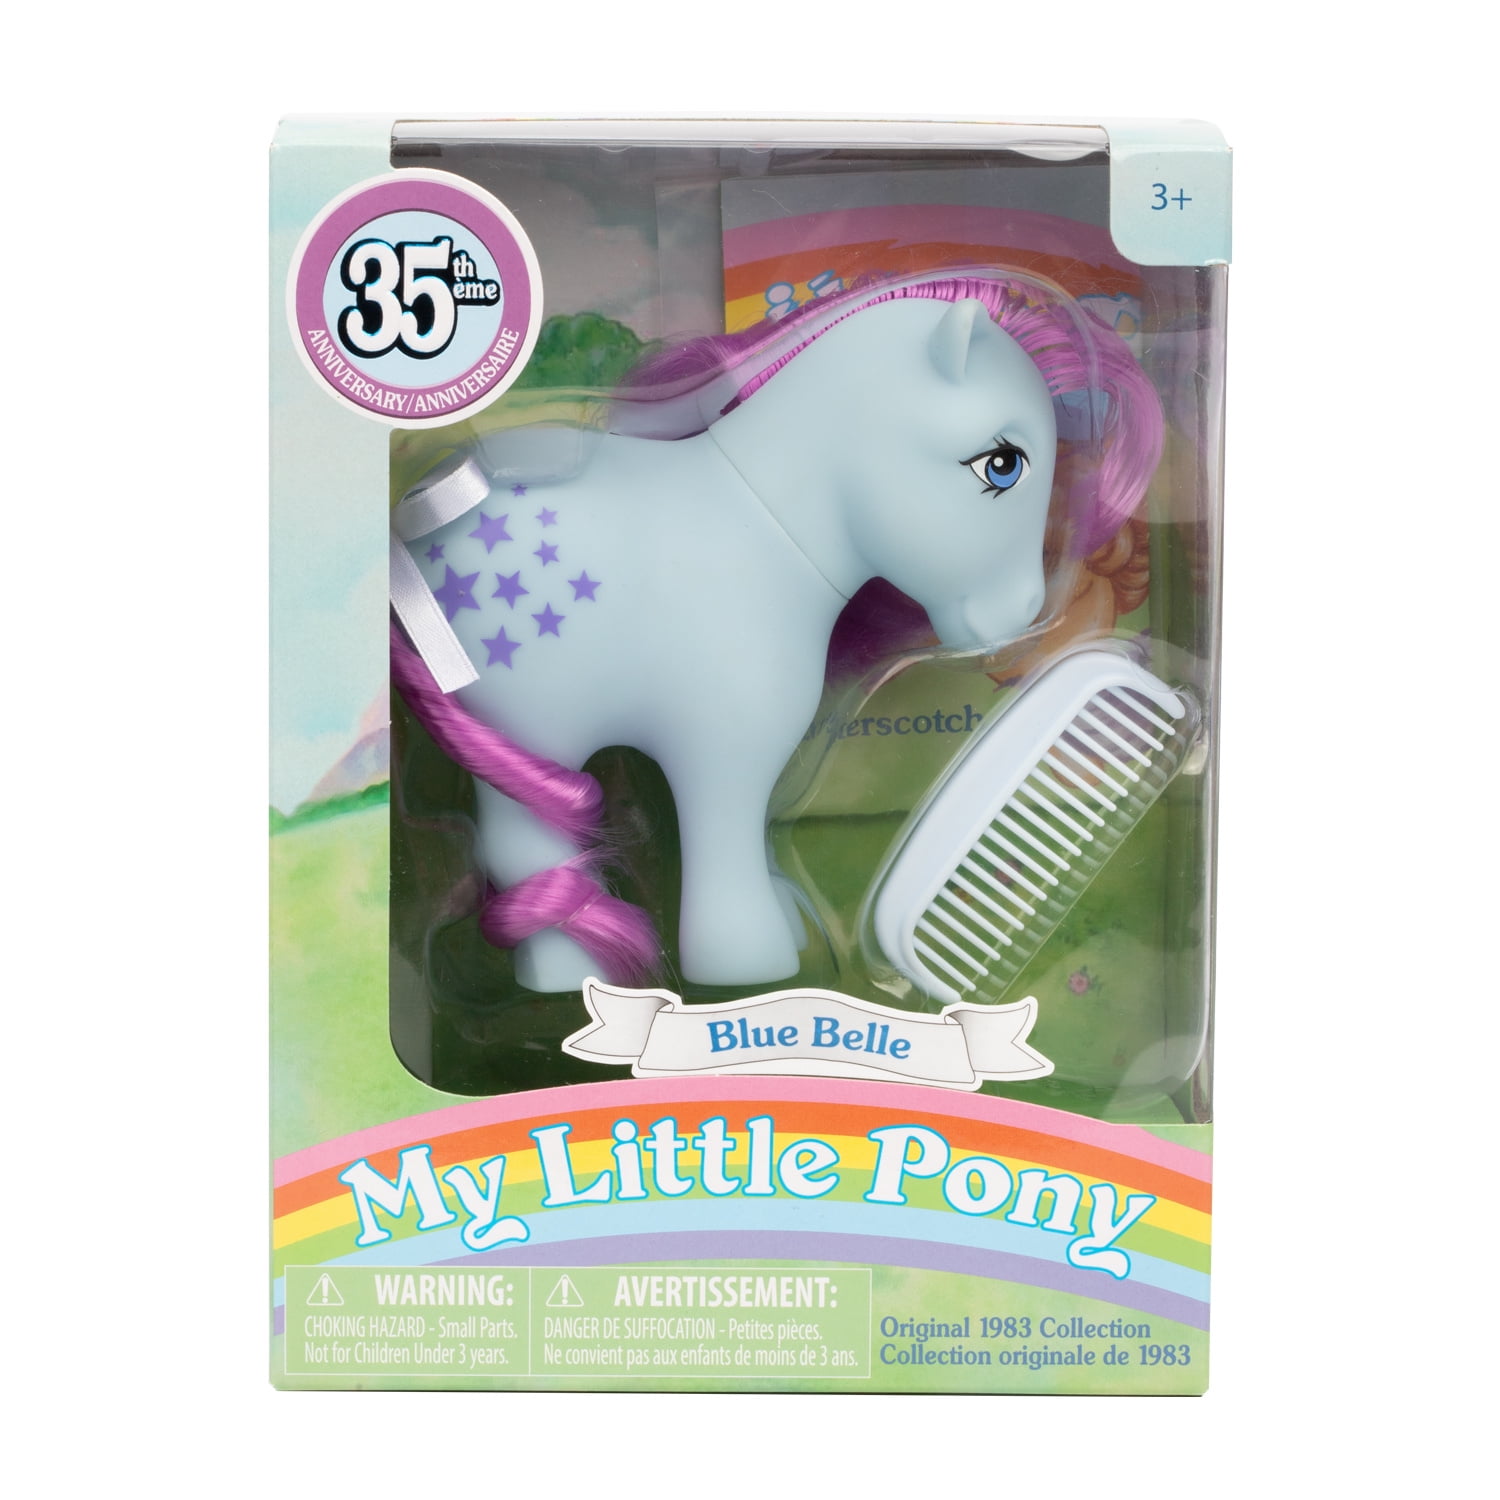 Retro 35th Anniversary Boxed Collectors My Little Pony firefly Figure 